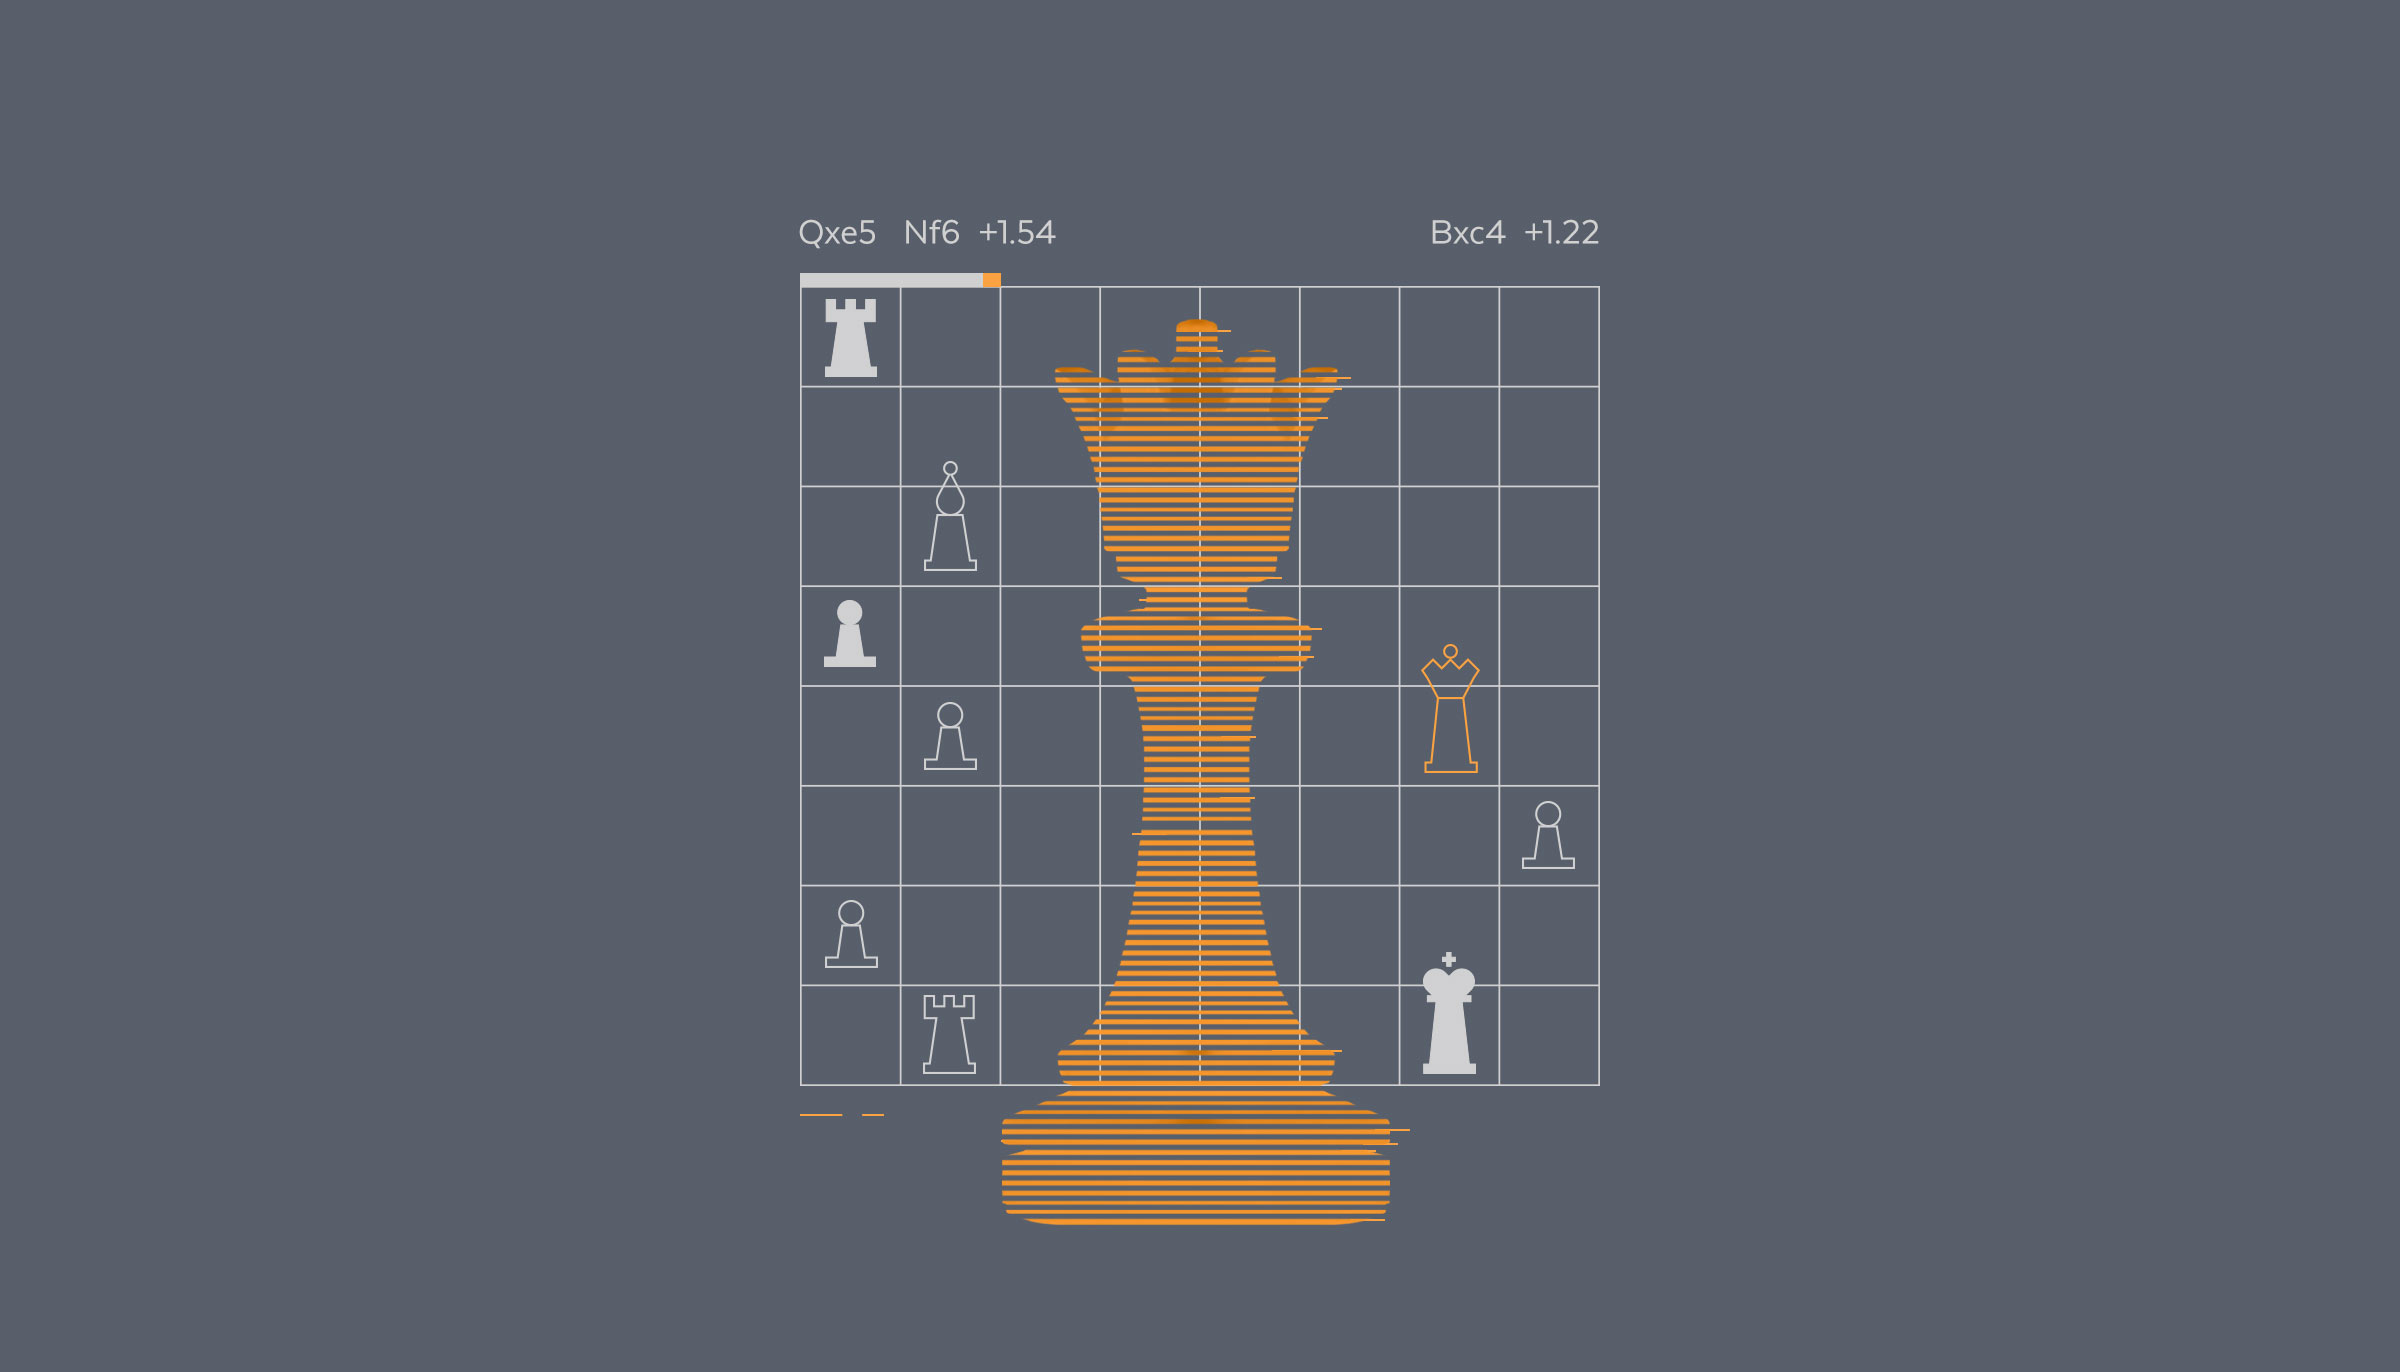 How to delete a move in analysis? - Chess Forums 